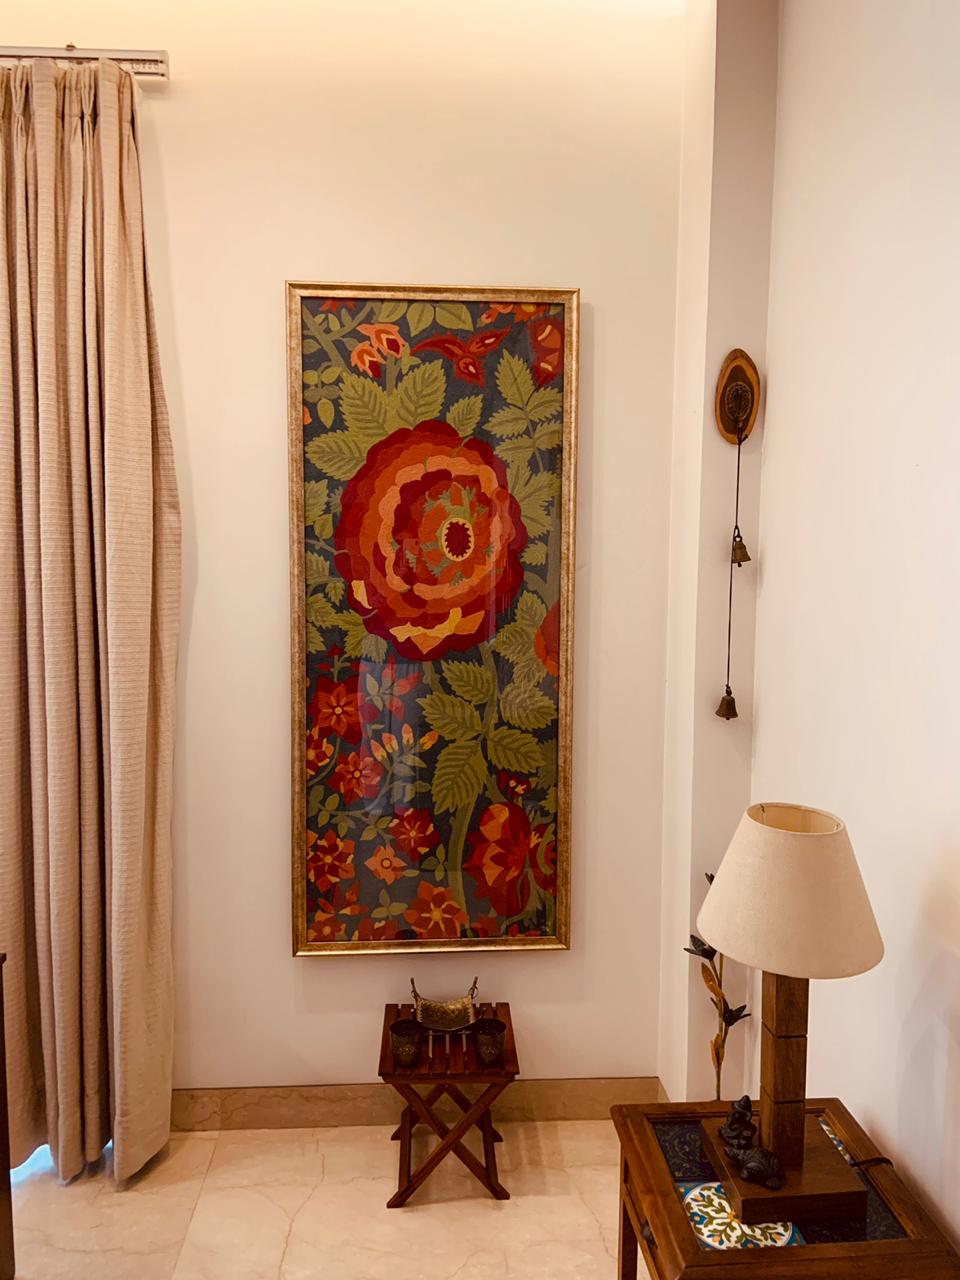 Rugs as artwork on the wall